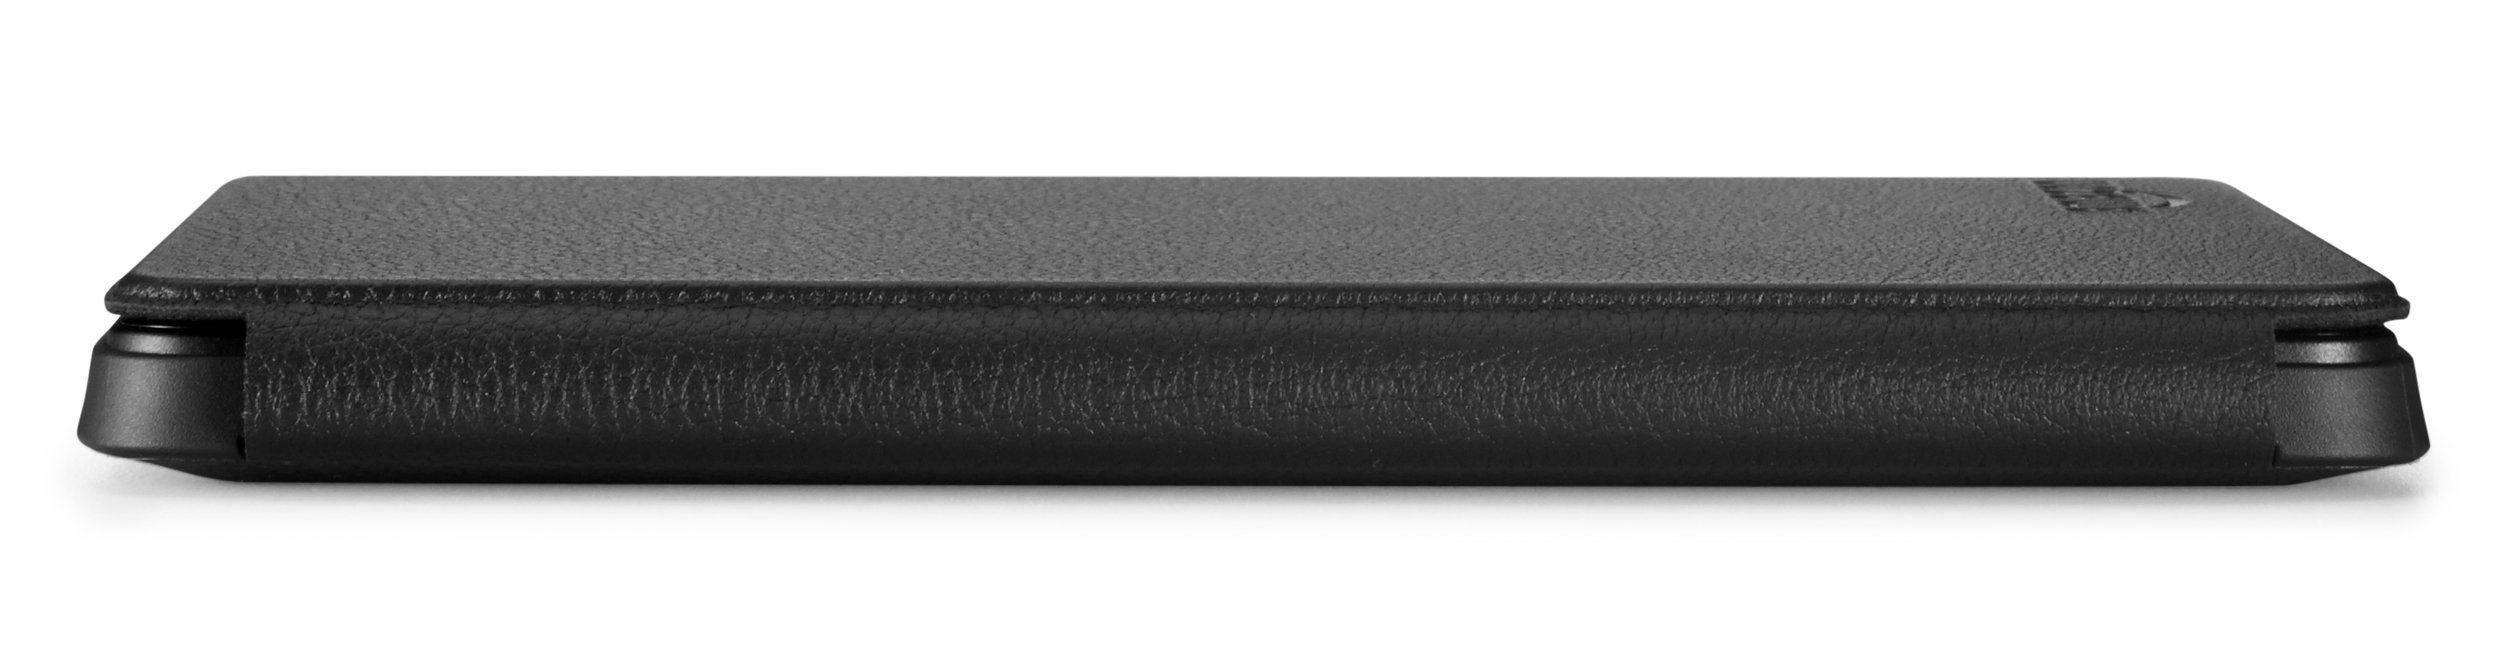 Amazon Protective Leather Cover for Kindle (7th Generation, 2015), Black - will not fit 8th Generation or previous generation Kindle devices or Kindle Paperwhite